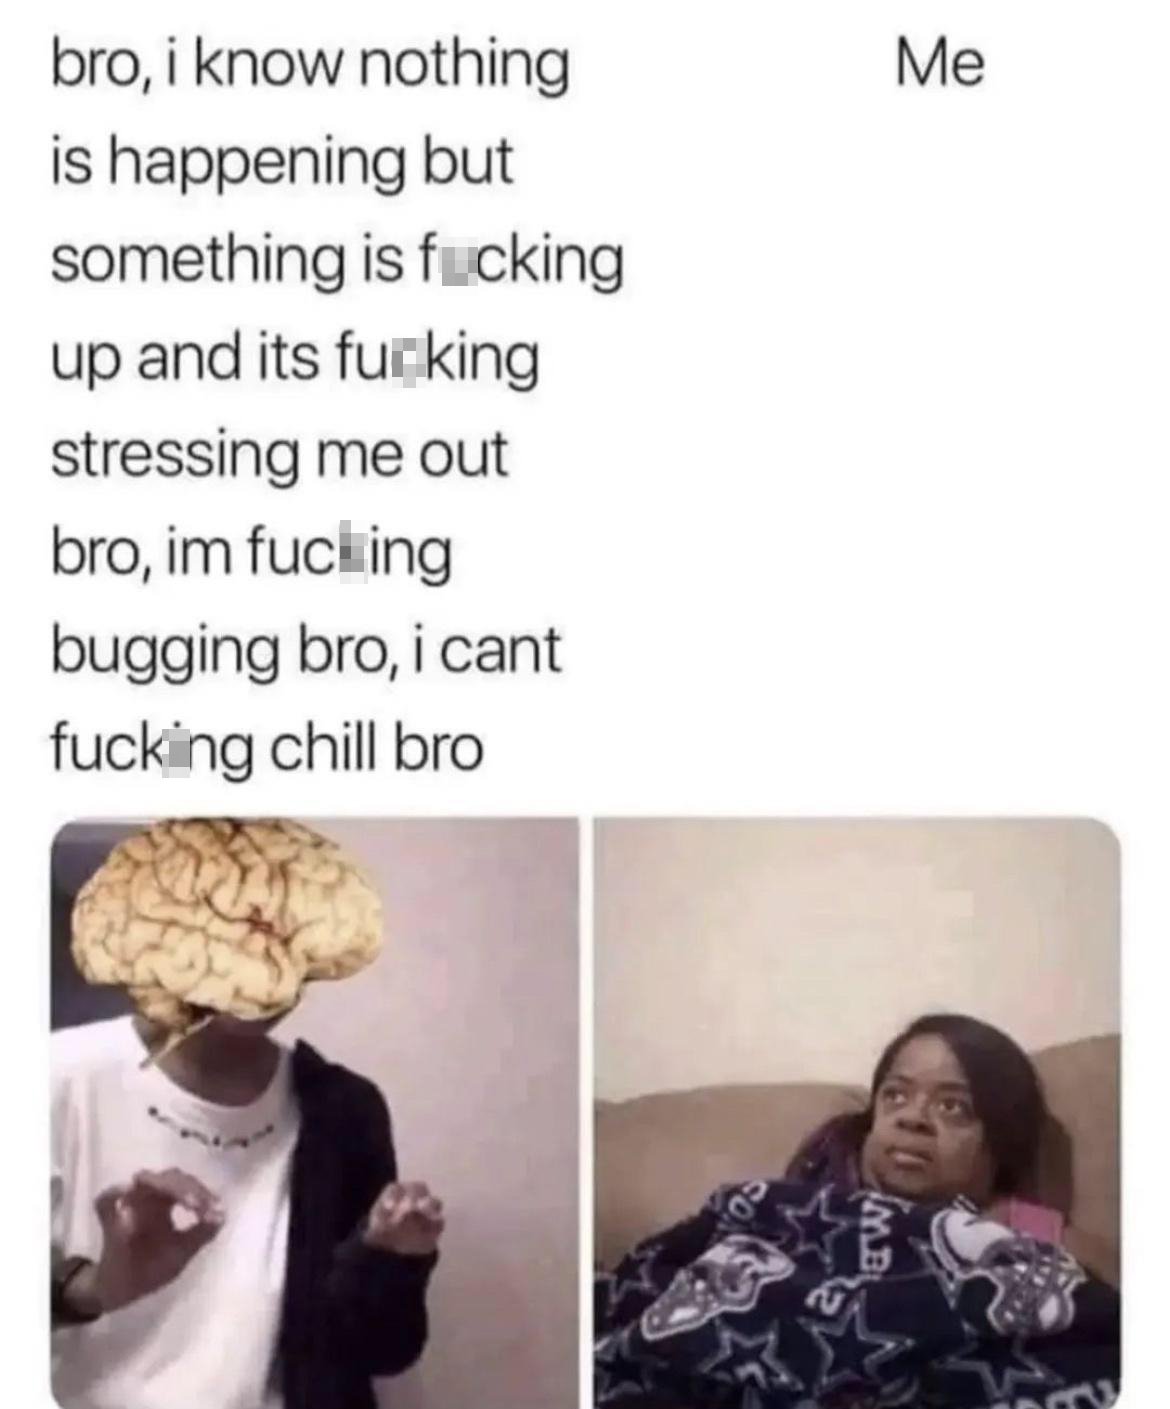 funny eid memes - bro, i know nothing is happening but something is fucking up and its fucking stressing me out bro, im fucking bugging bro, i cant fucking chill bro Me